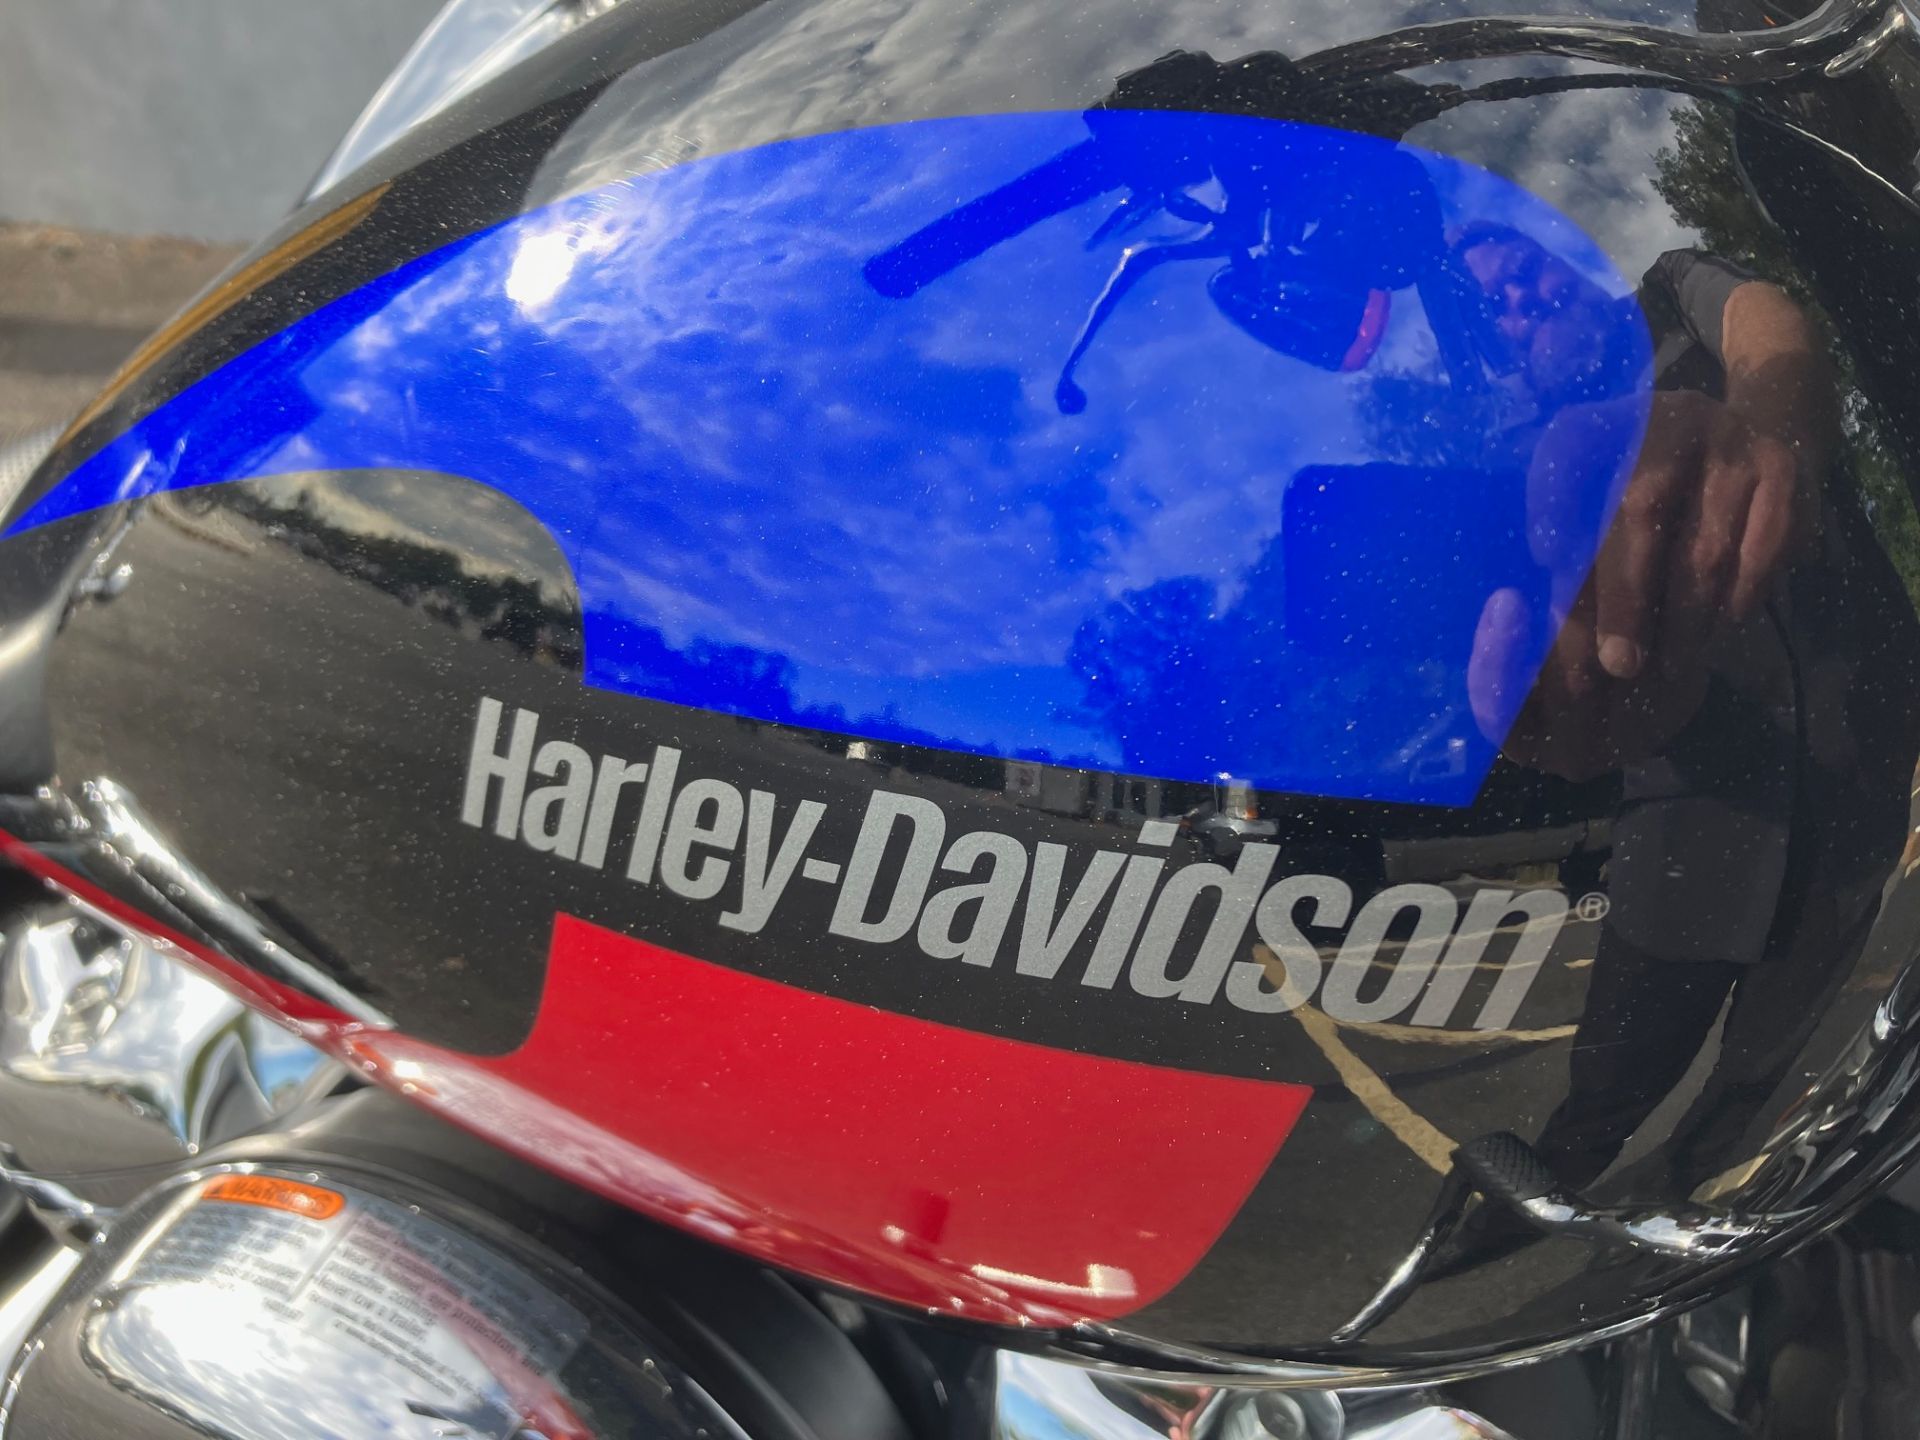 2019 Harley-Davidson LOW RIDER in West Long Branch, New Jersey - Photo 8